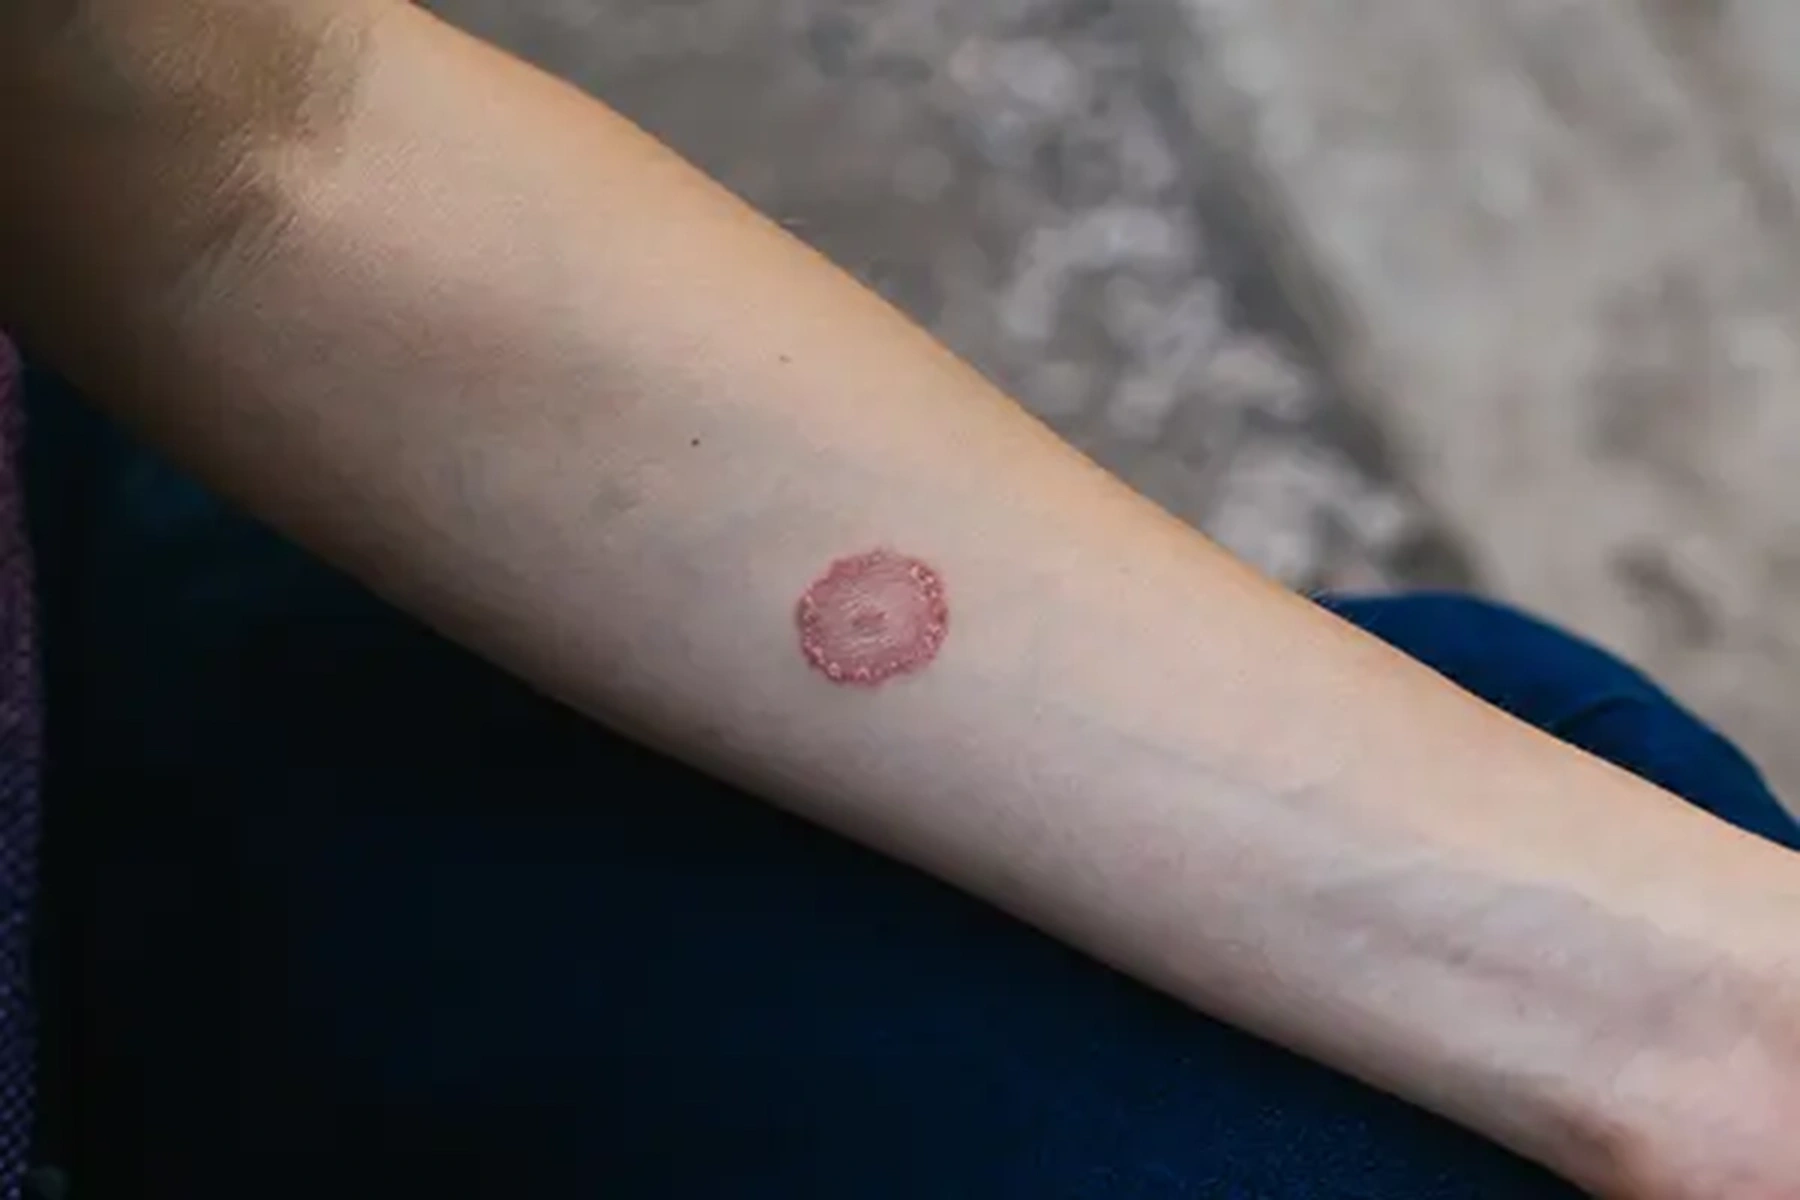 A ringworm rash on the inside of someone's arm.